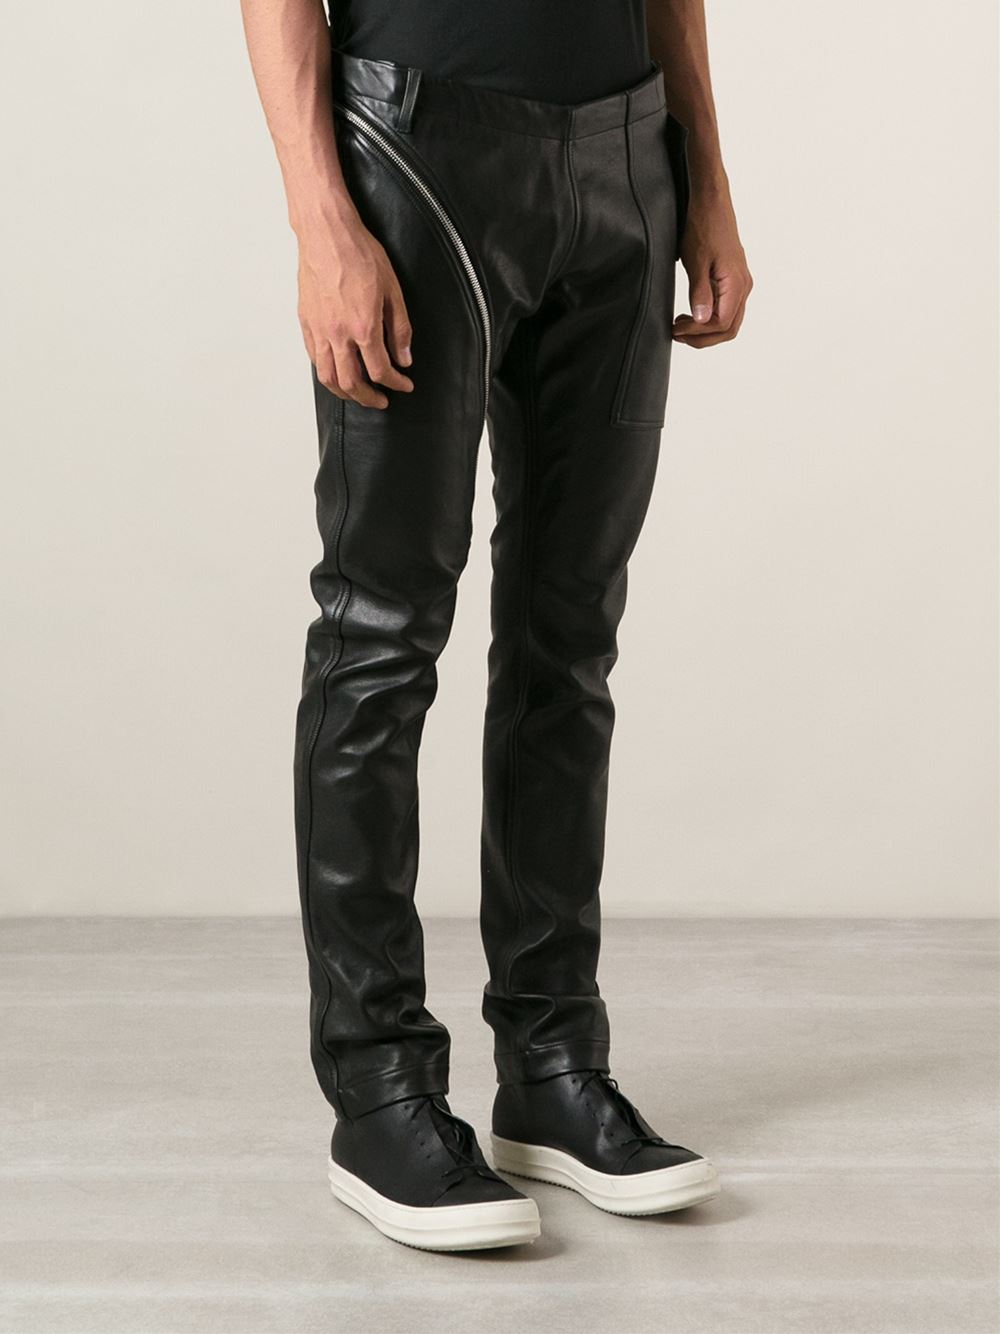 Rick Owens Slim Fit Leather Trousers in Black for Men - Lyst